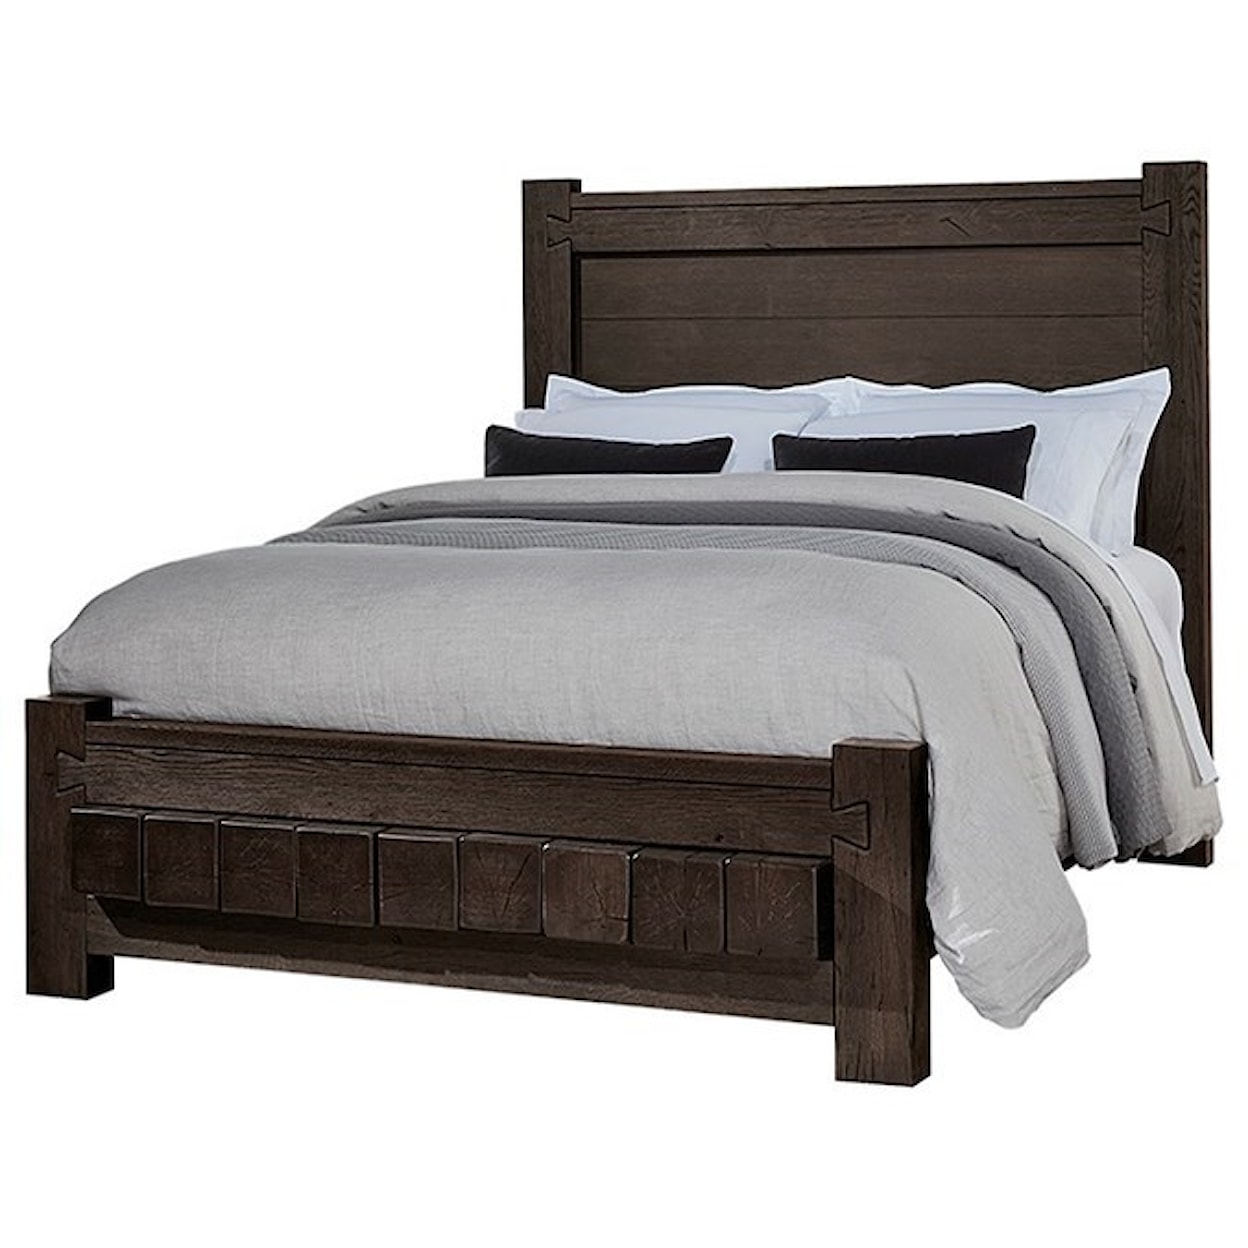 Vaughan Bassett Dovetail - 751 King Low Profile Bed